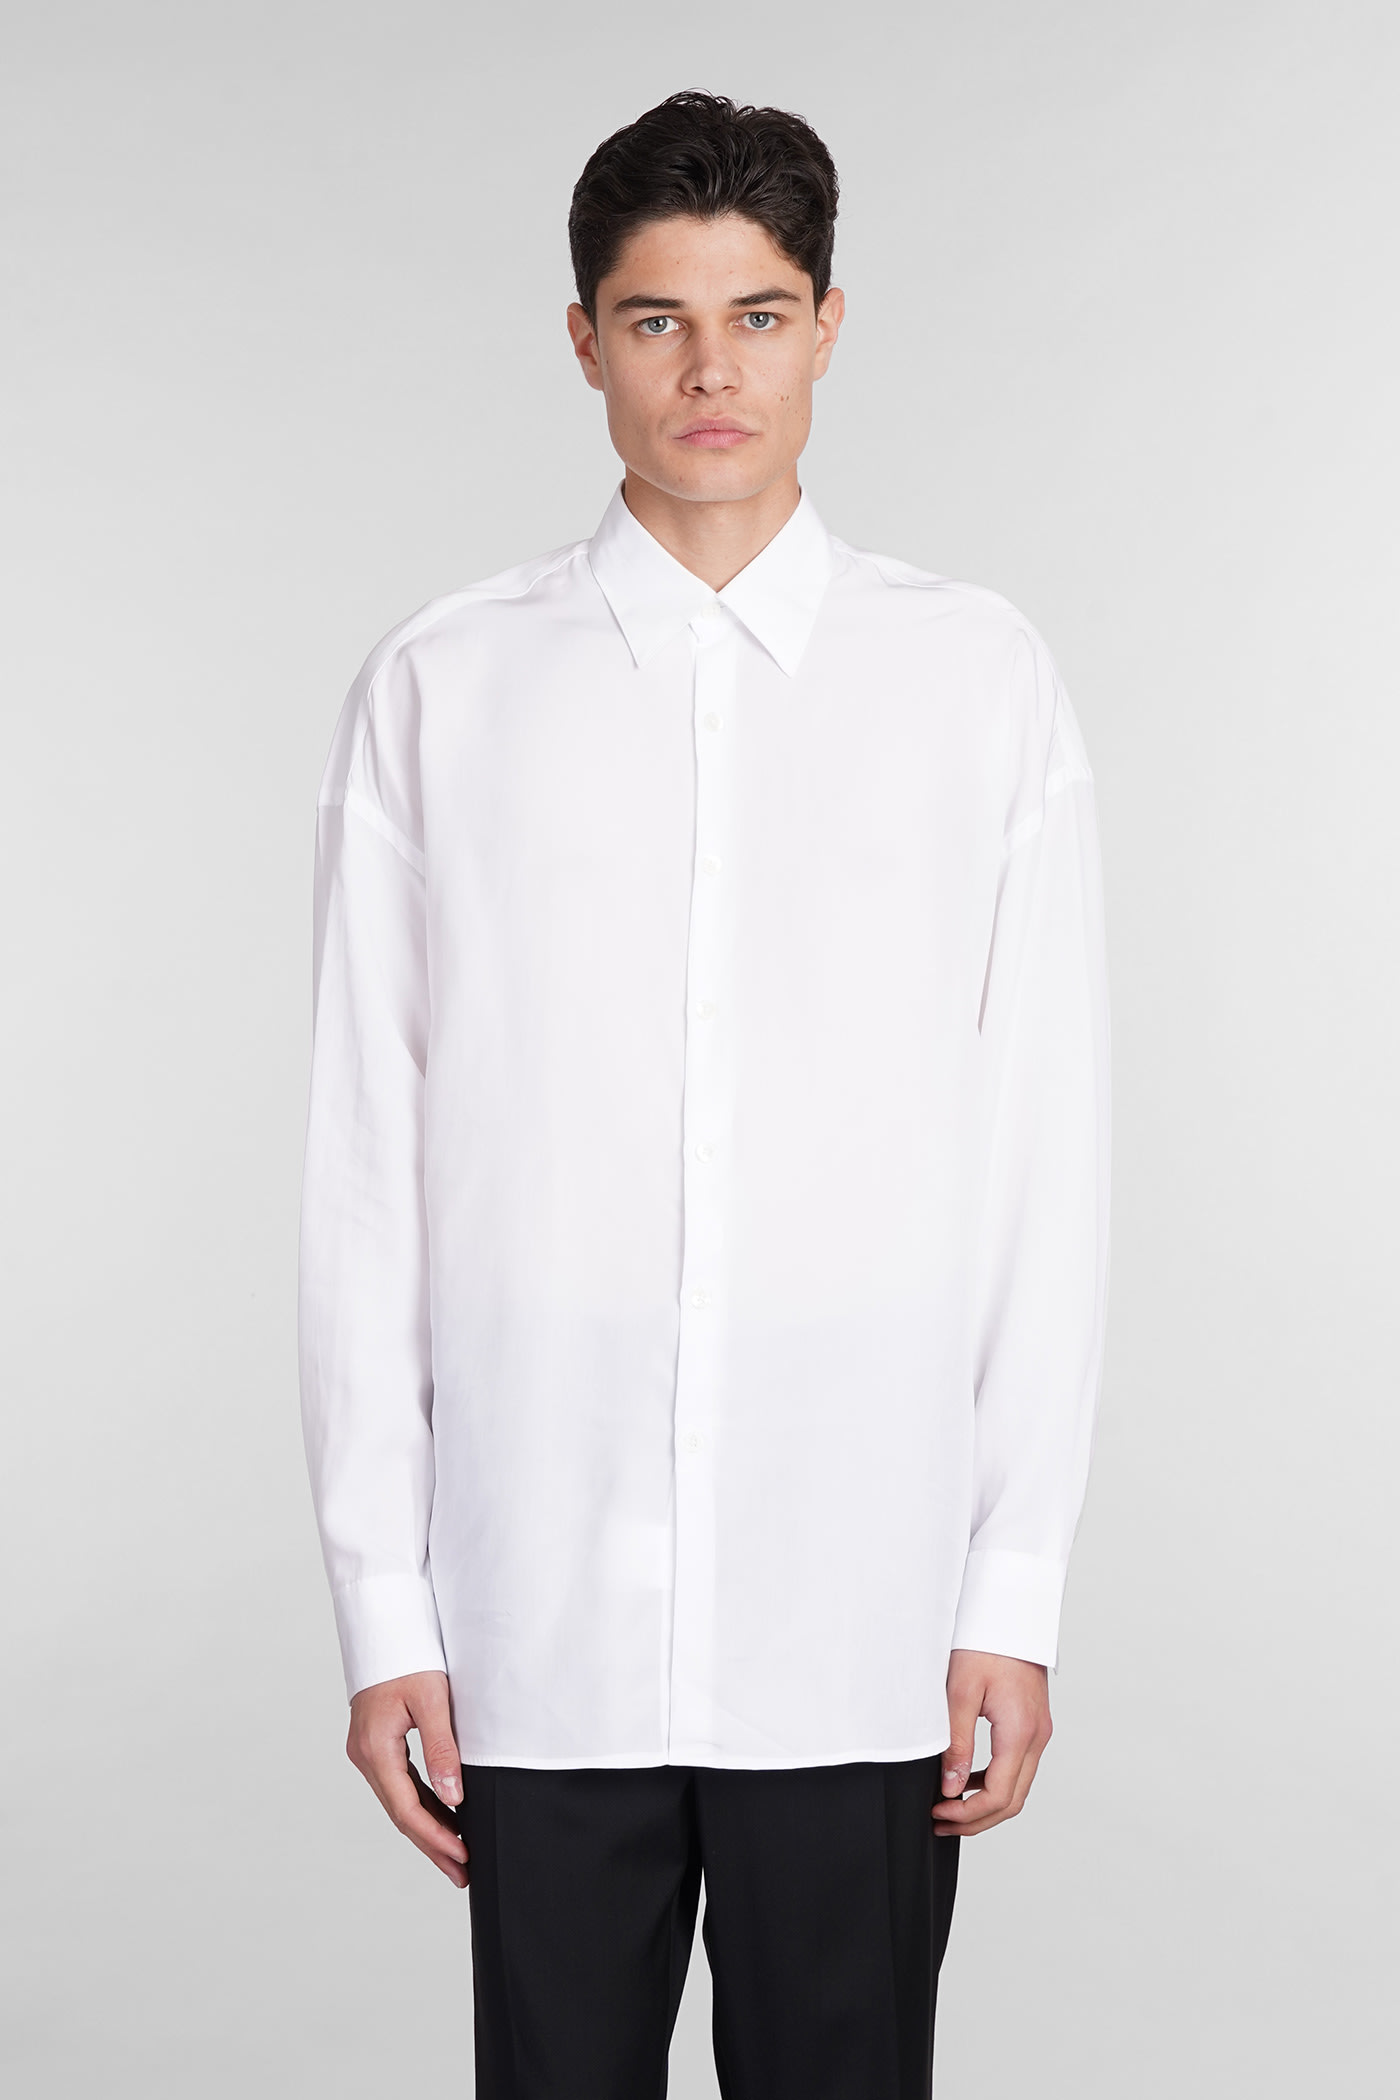 Valentino Shirt In White Cly